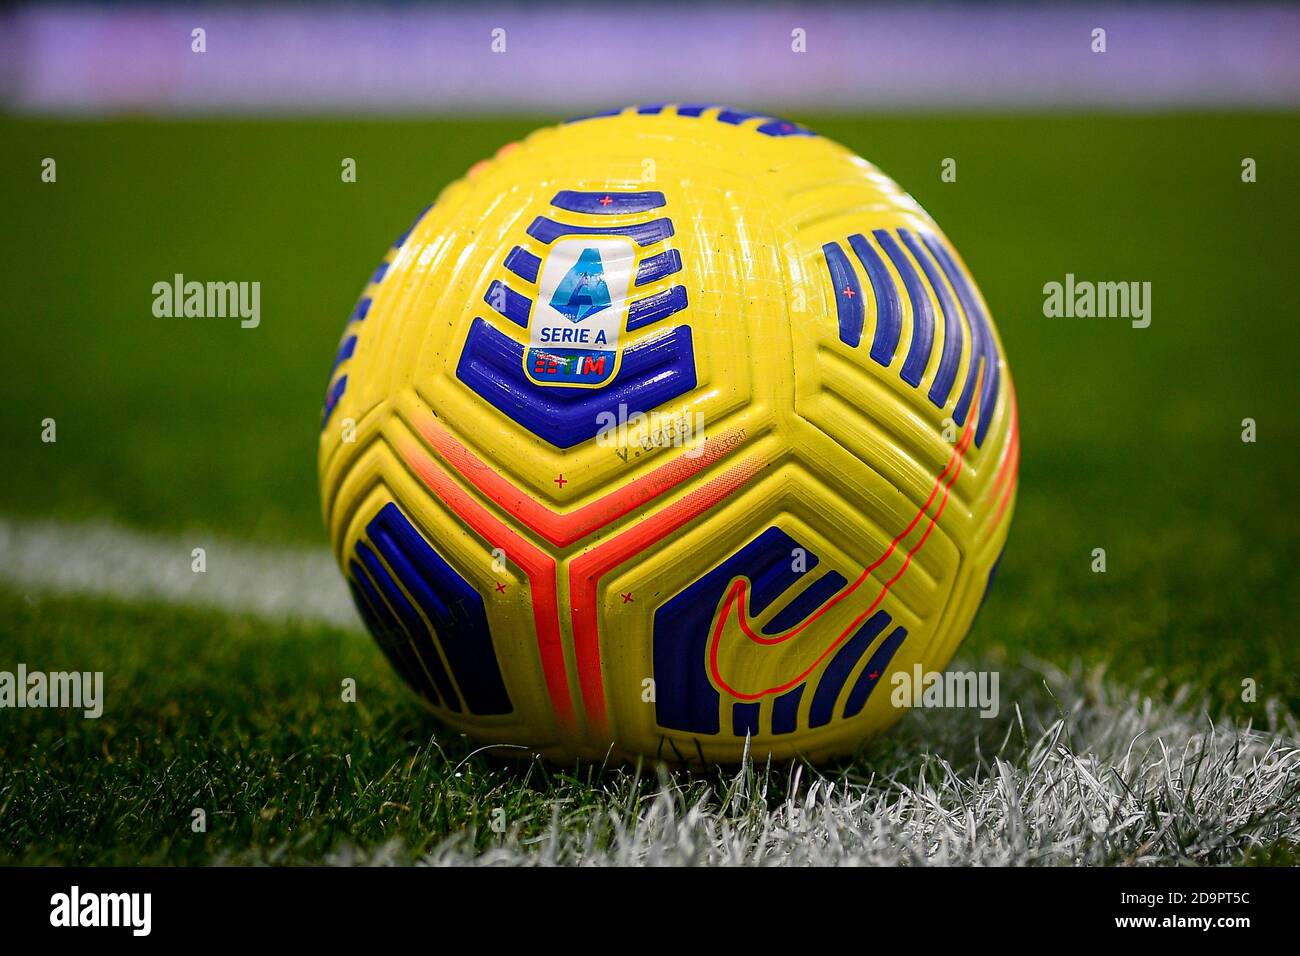 Reggio Emilia, Italy - 06 November, 2020: Official Serie A match ball 'Nike  Flight Hi-Vis' is seen during the Serie A football match between US  Sassuolo and Udinese Calcio. The match ended